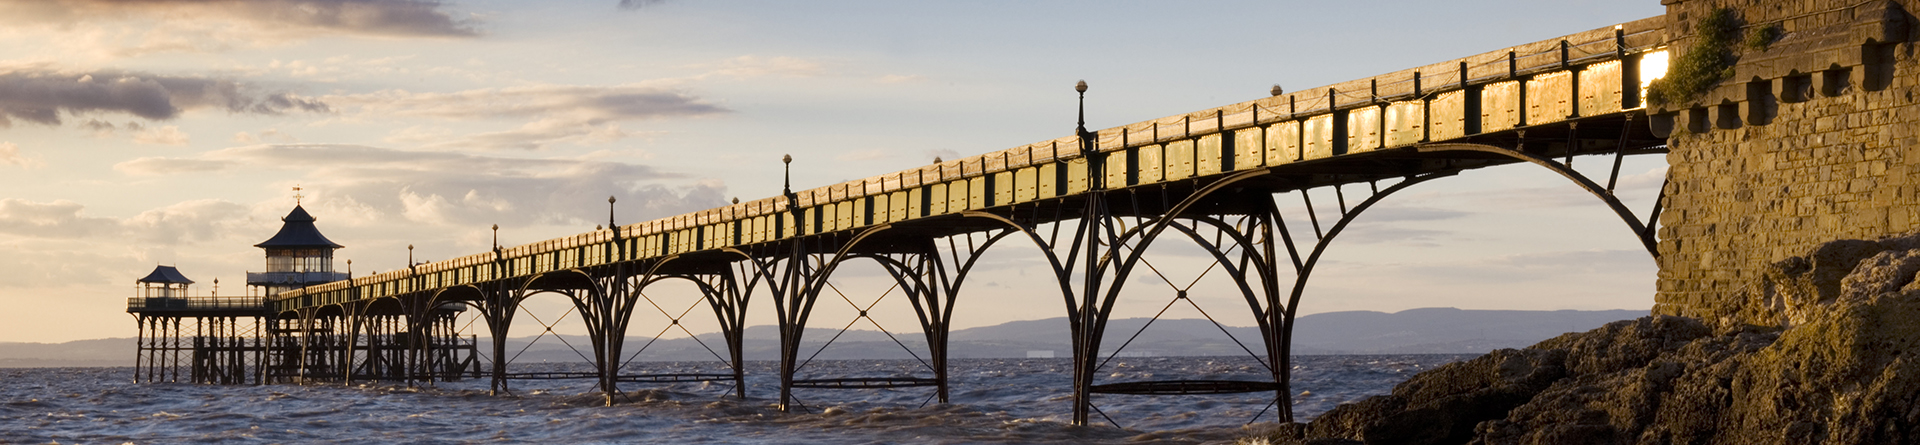 The south elevation of Clevedon Pier, taken from the beach